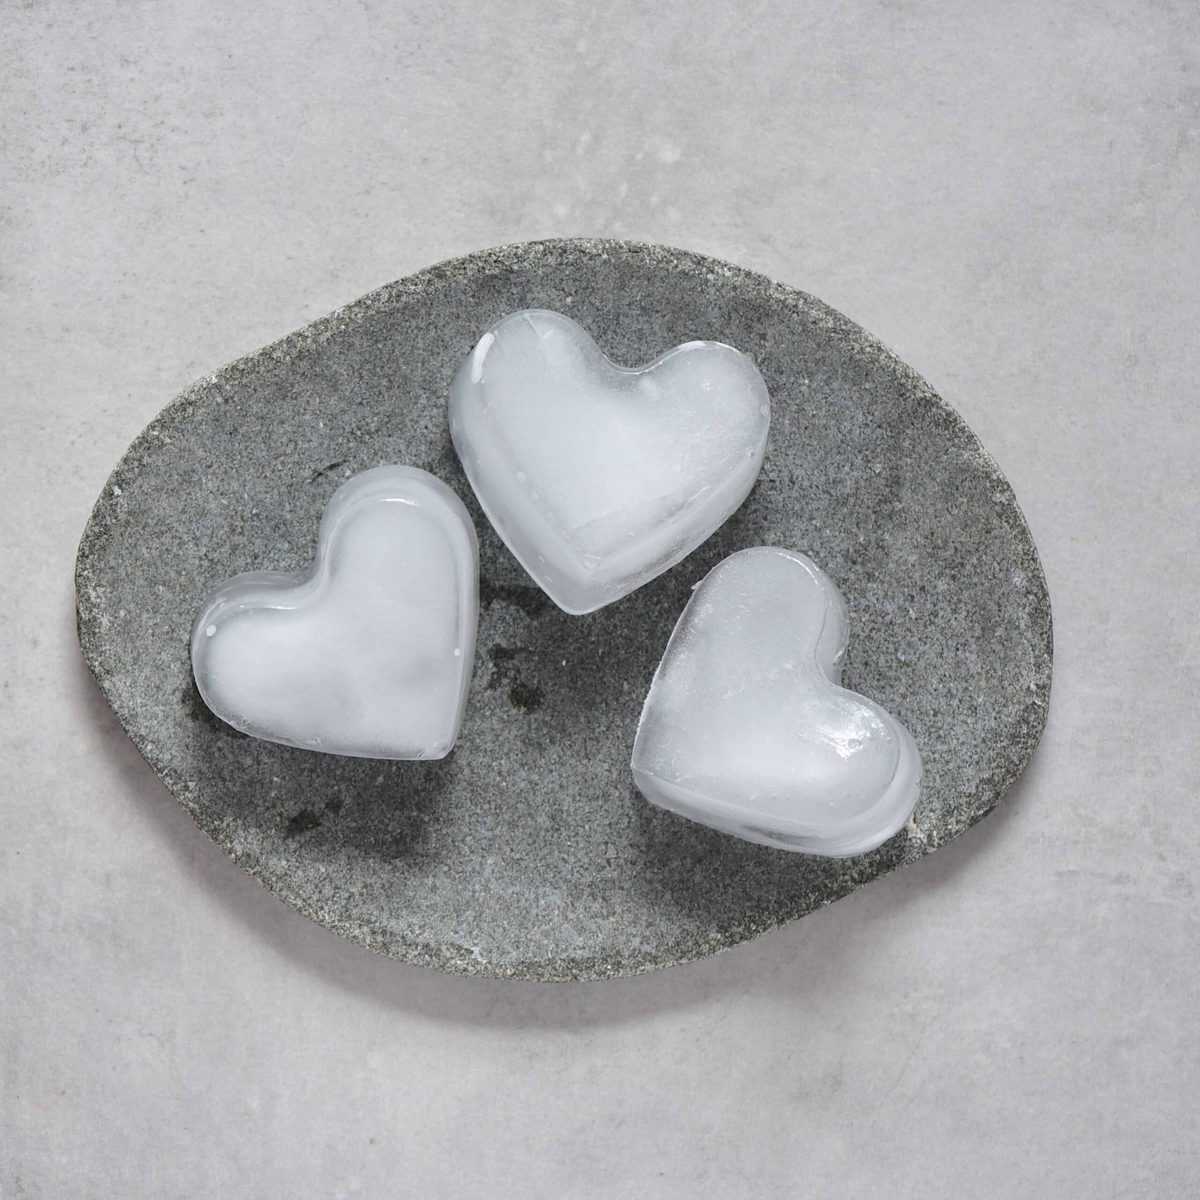 Heart-shaped ice cubes for the Avocado Chocolate Mousse